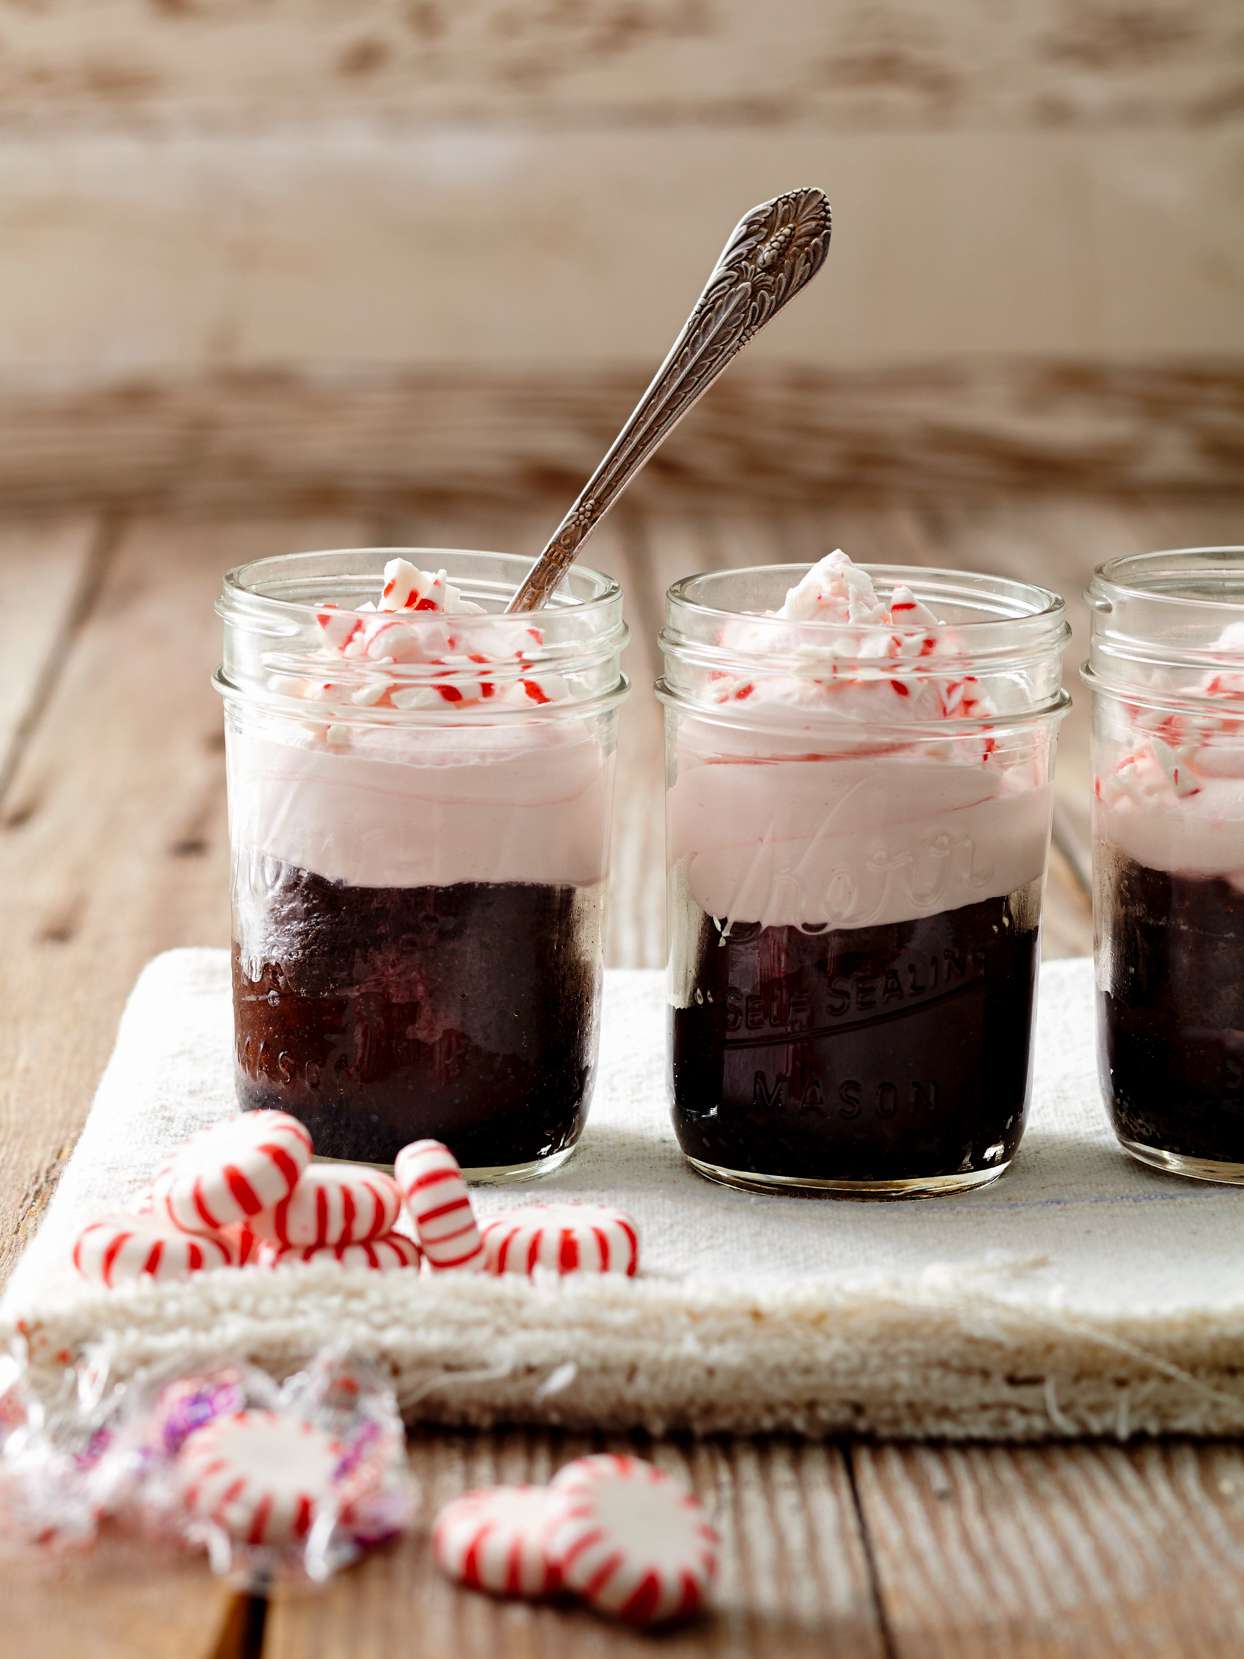 Peppermint-Fudge Pie with Peppermint Chantilly Cream